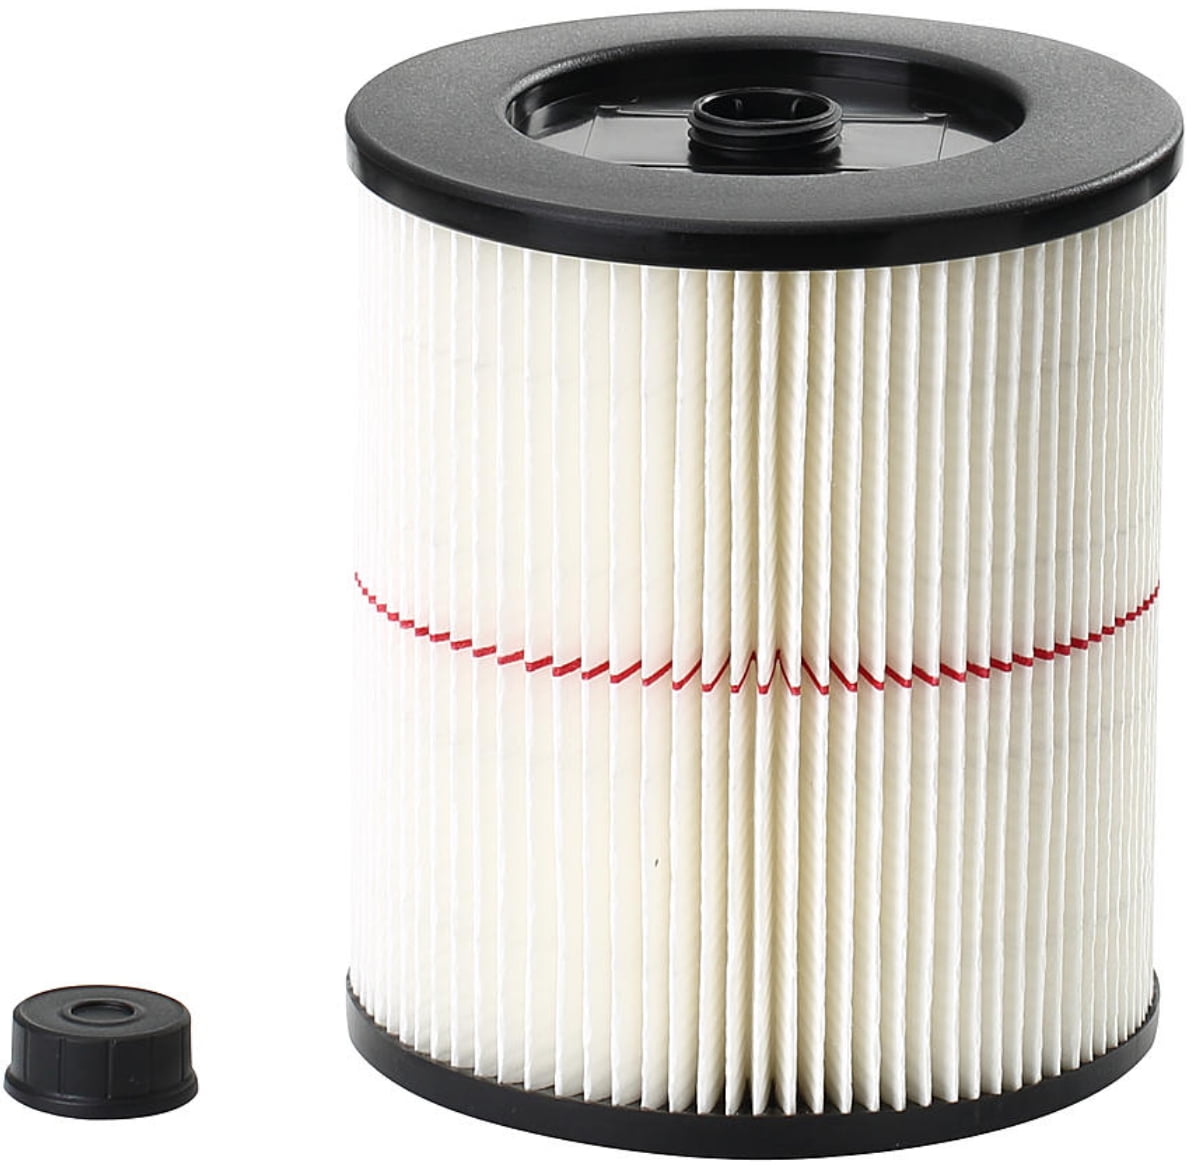 2 Pack ATXKXE Wet/Dry Vacuum Cleaner Air Cartridge Filter for Craftsman 17816 Filter